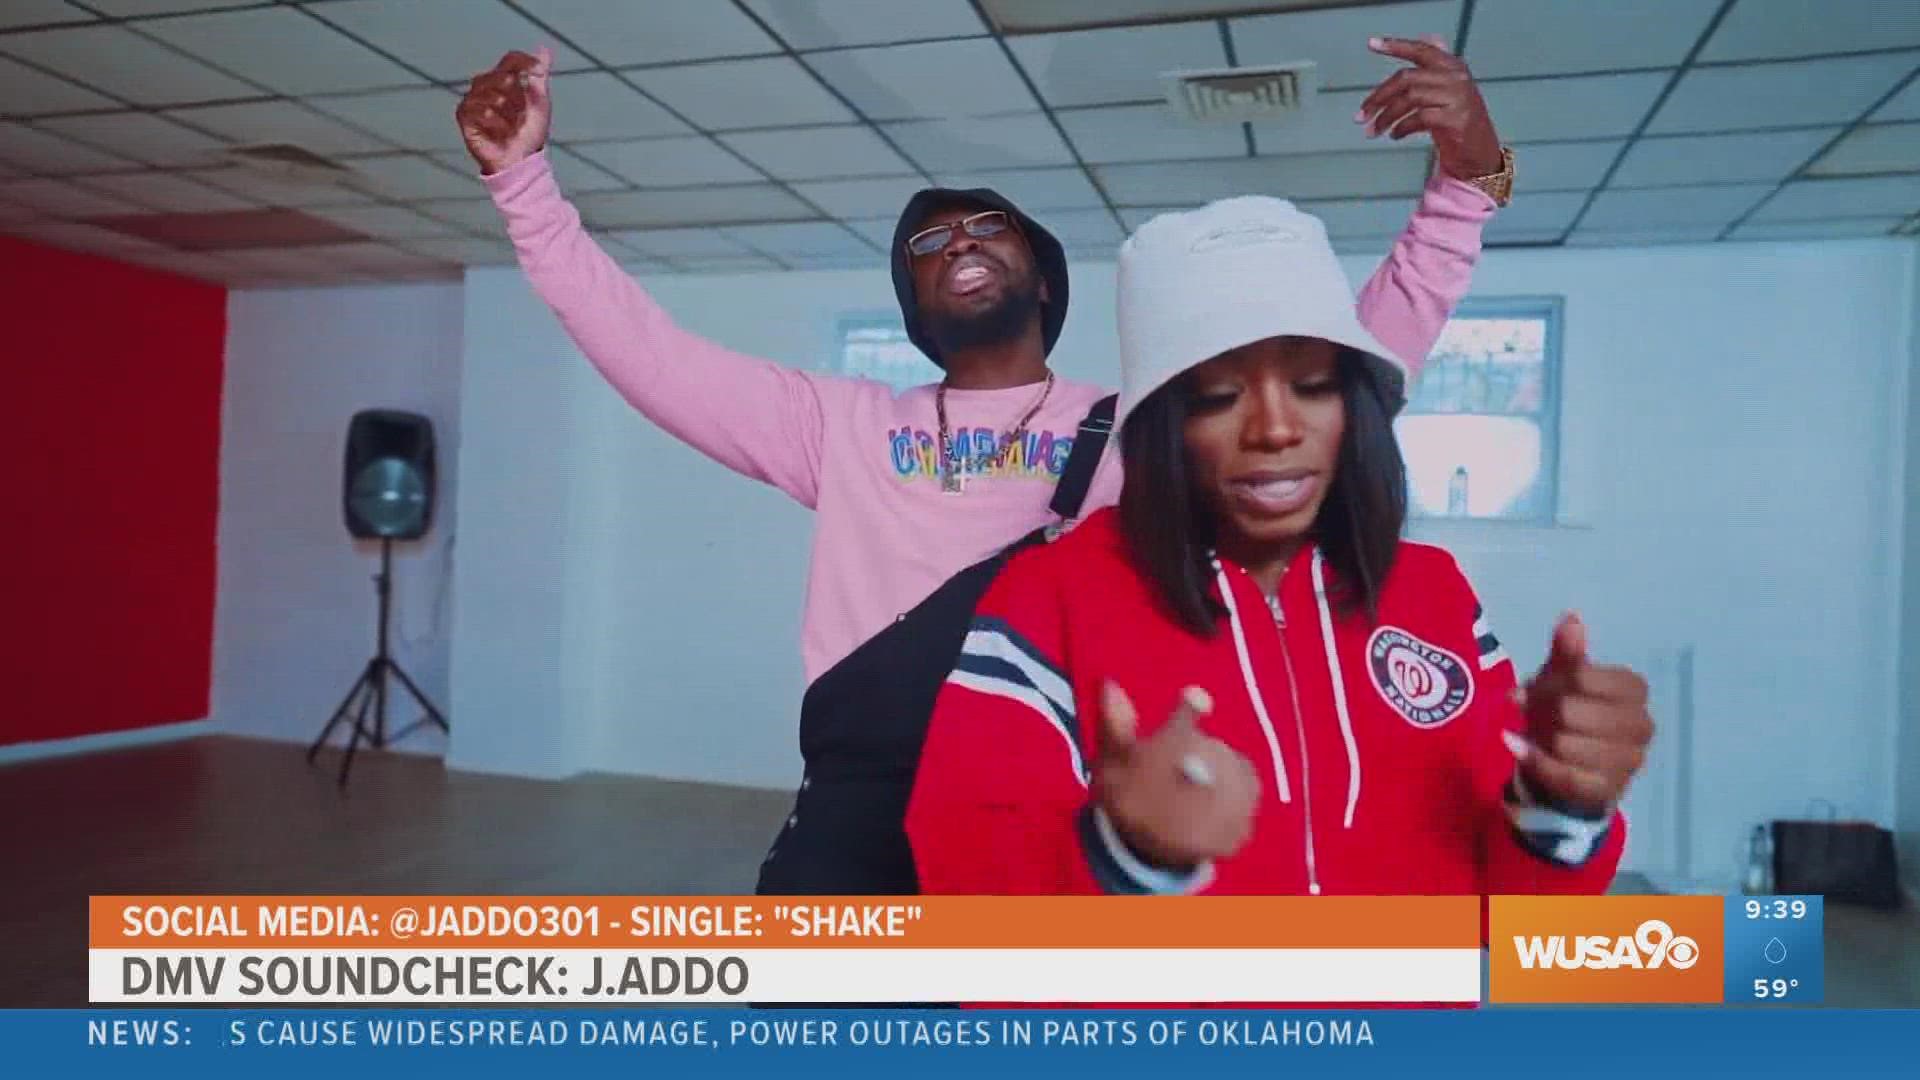 In today's DMV Soundcheck we feature Silver Spring native J. Addo.  His latest single "Memoirs" is gaining national attention. Check out his single called "Shake".